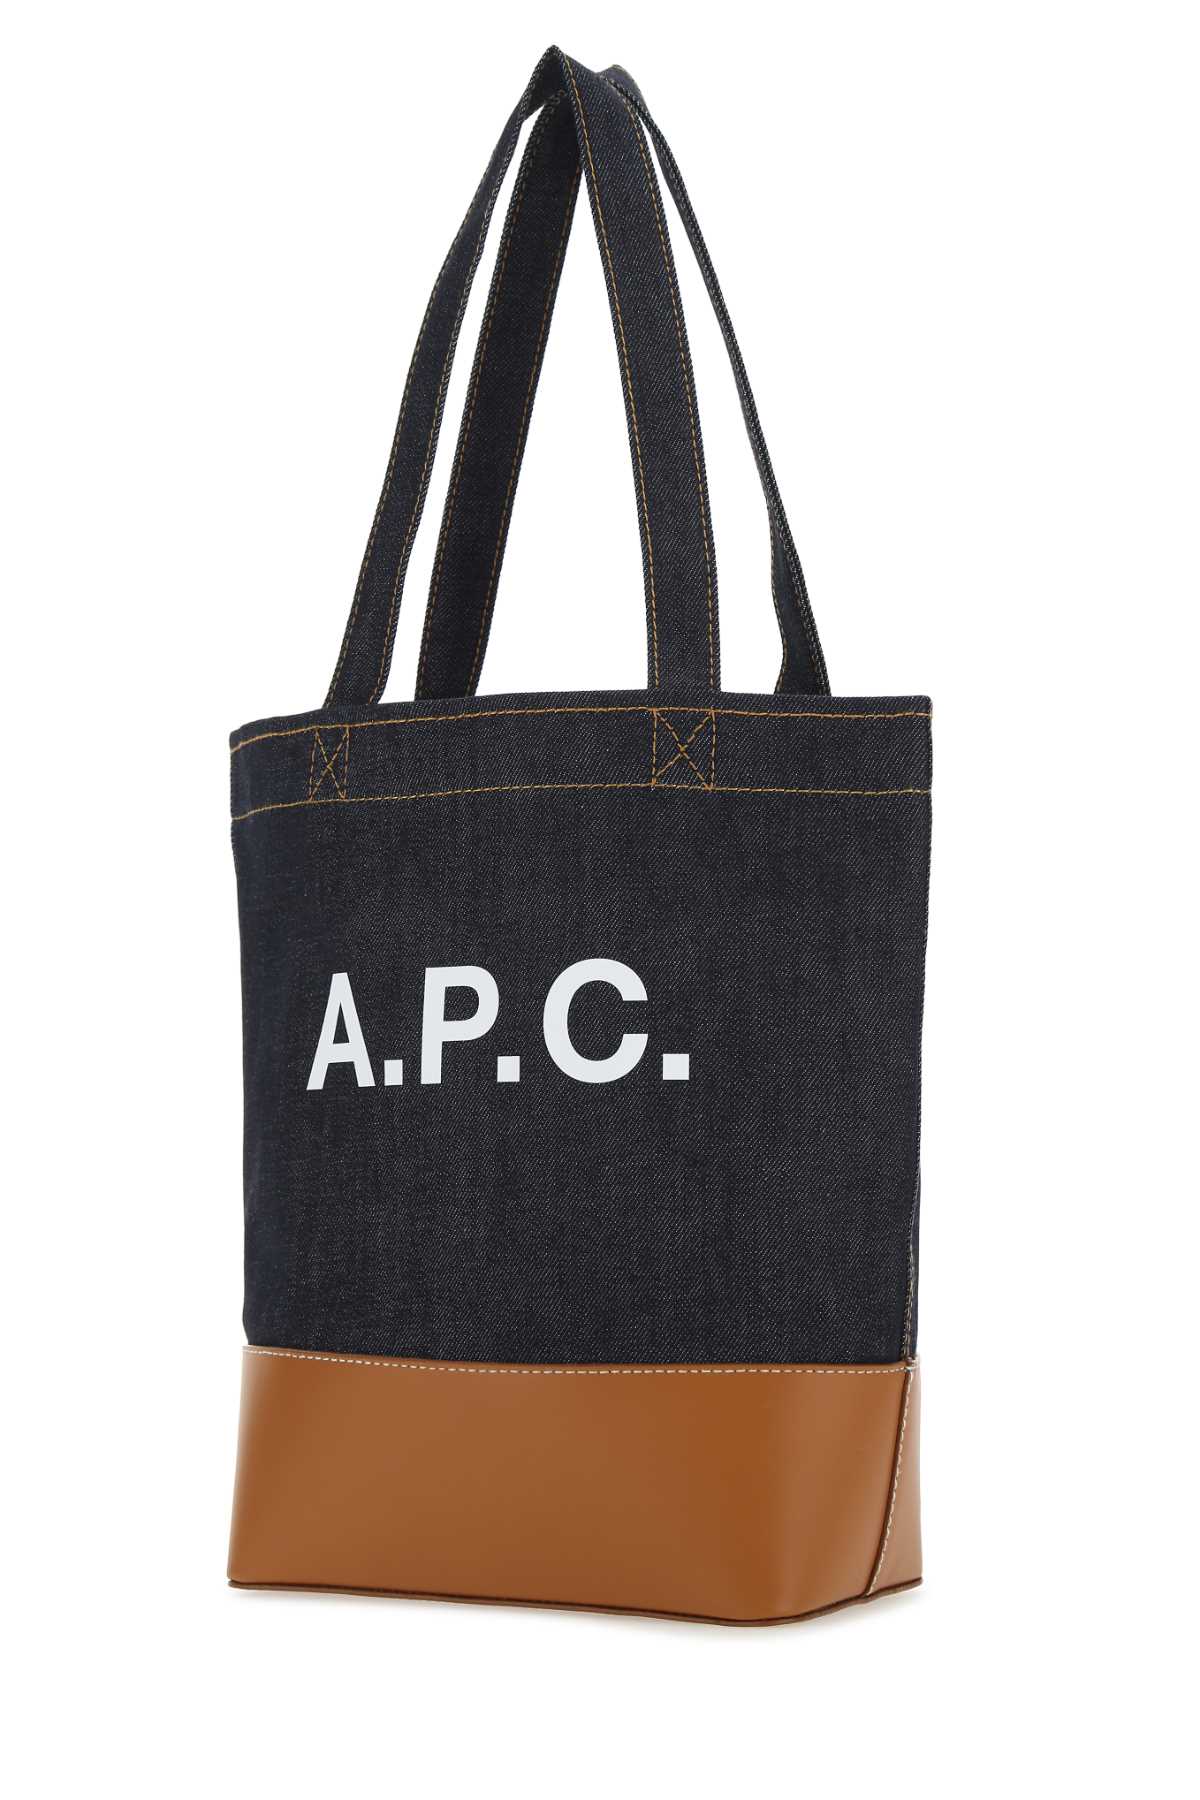 Apc Two-tone Denim And Leather Axelle Shopping Bag In Caramel